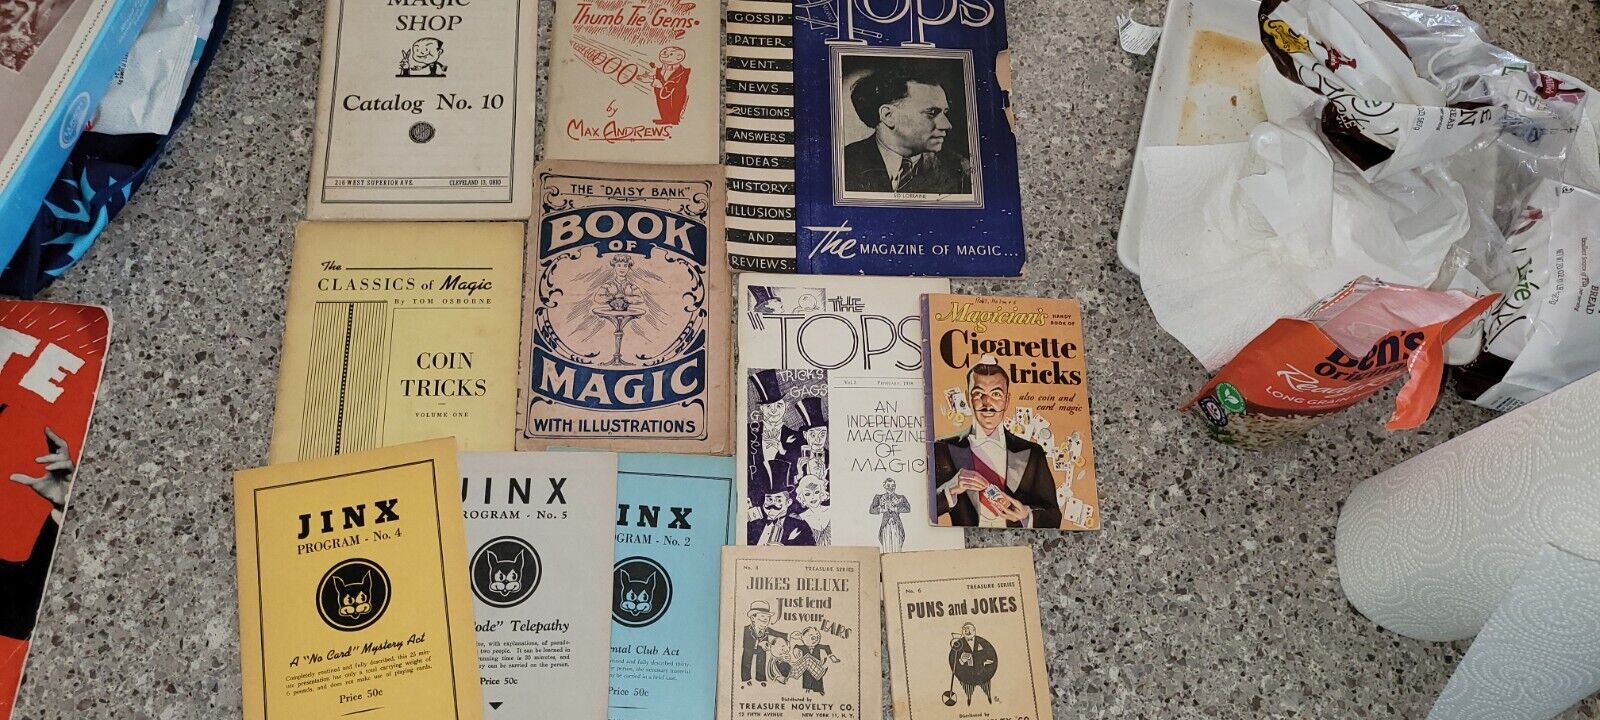 Vintage MAGIC Book Pamphlet Catalog Advertisements + More Lot Very OLD